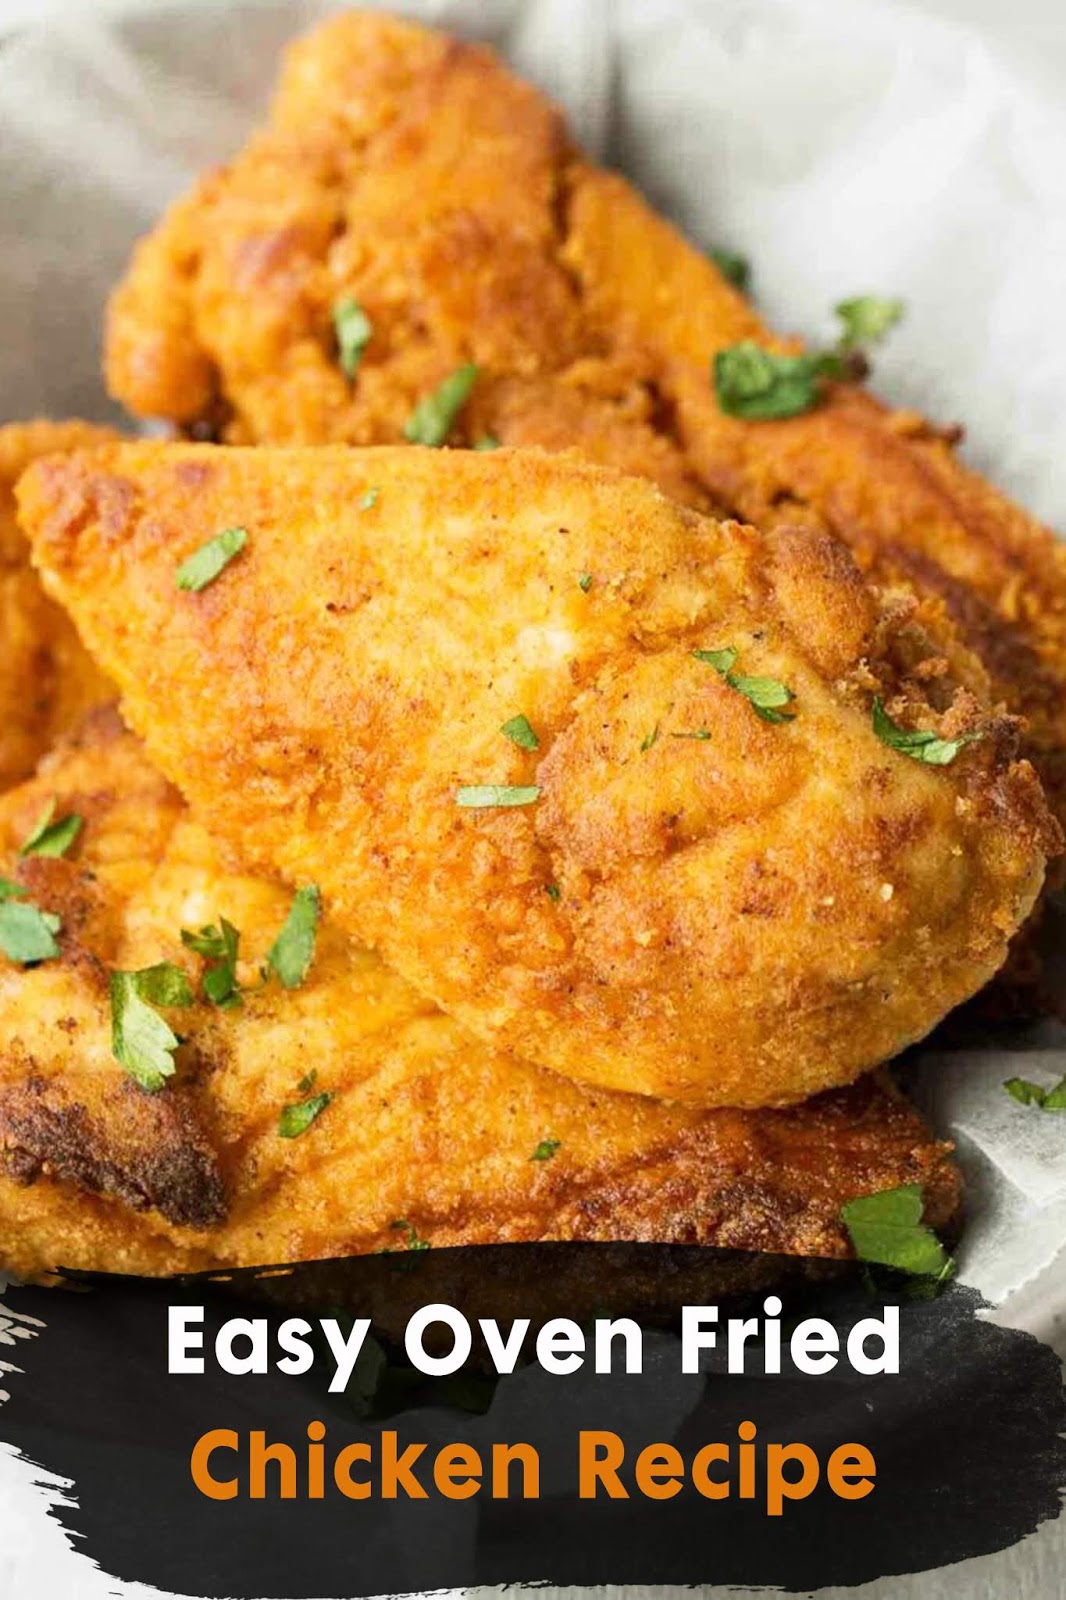 Easy Oven Fried Chicken Recipe - 3 SECONDS